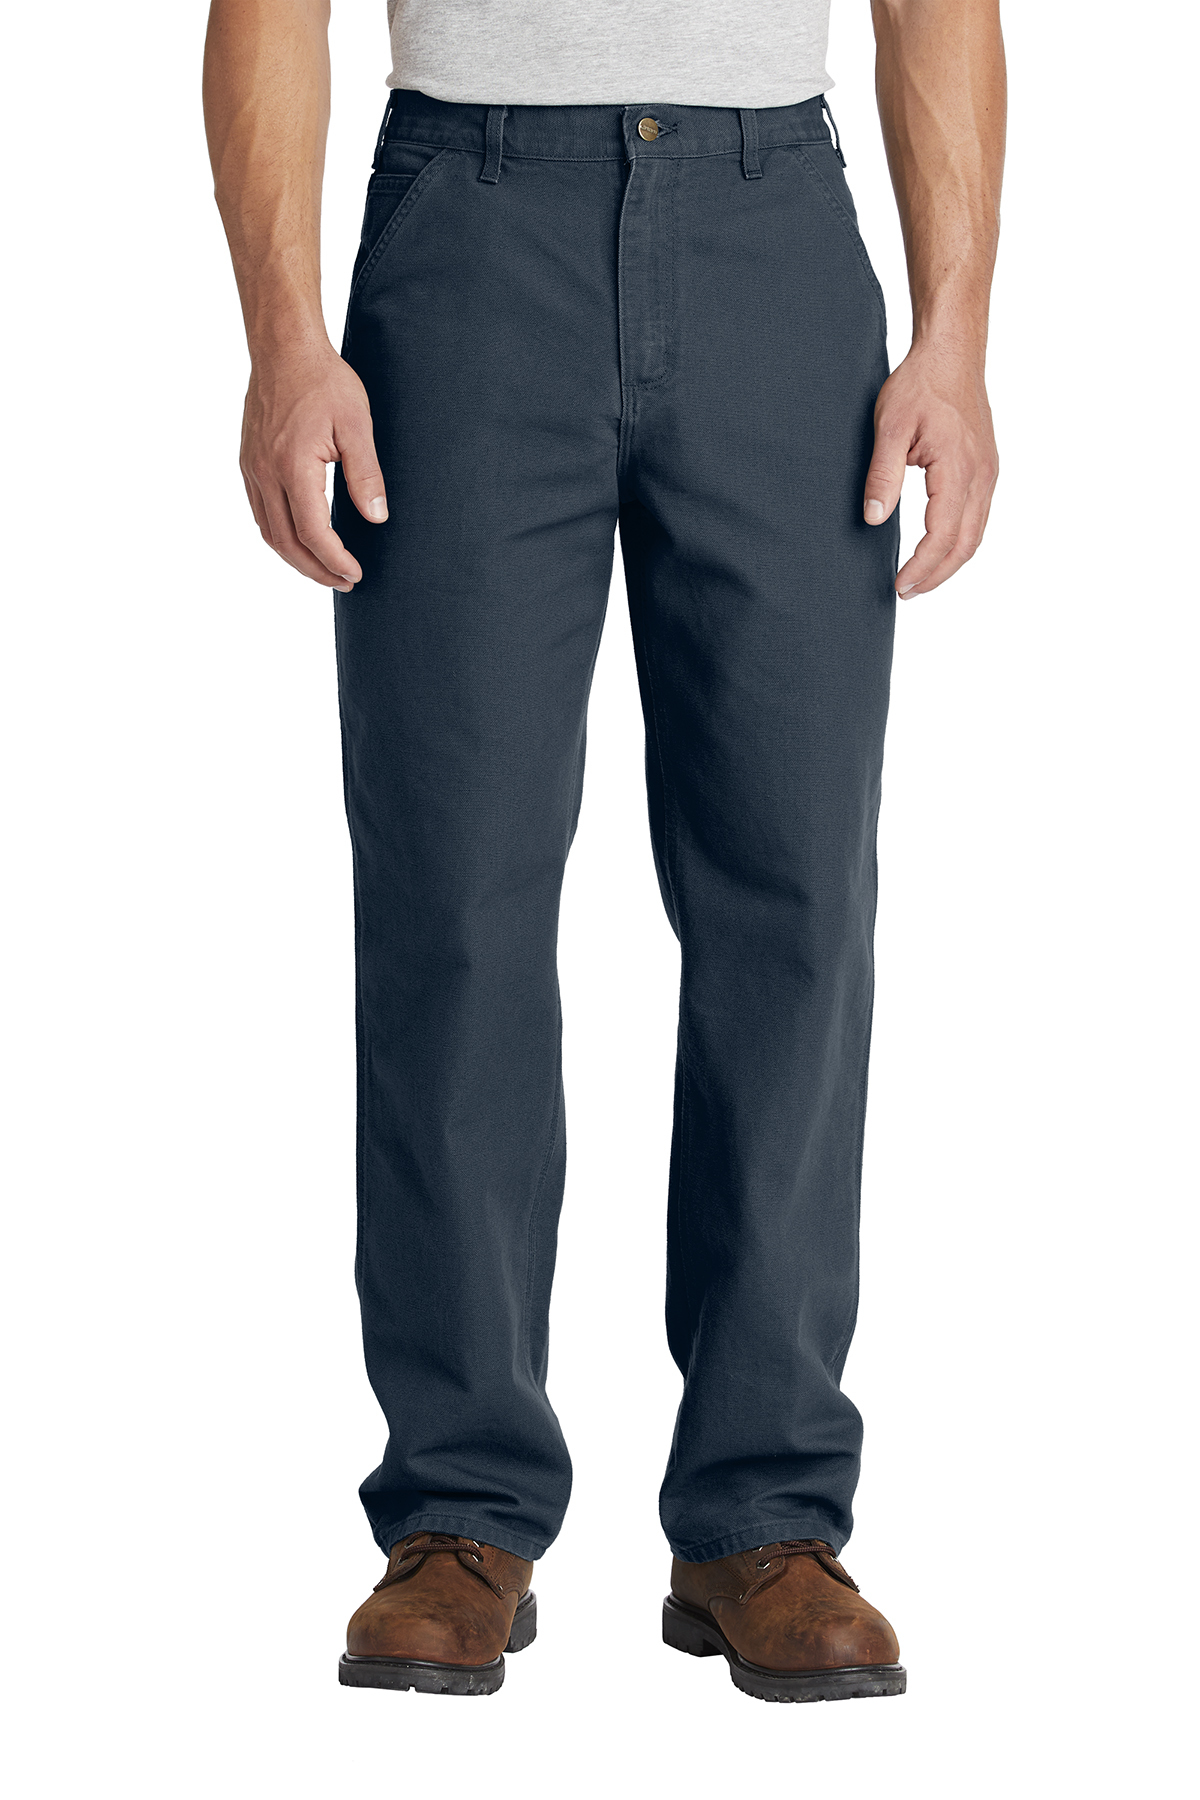 Carhartt Washed-Duck Work Dungaree – Sheehan Property Management